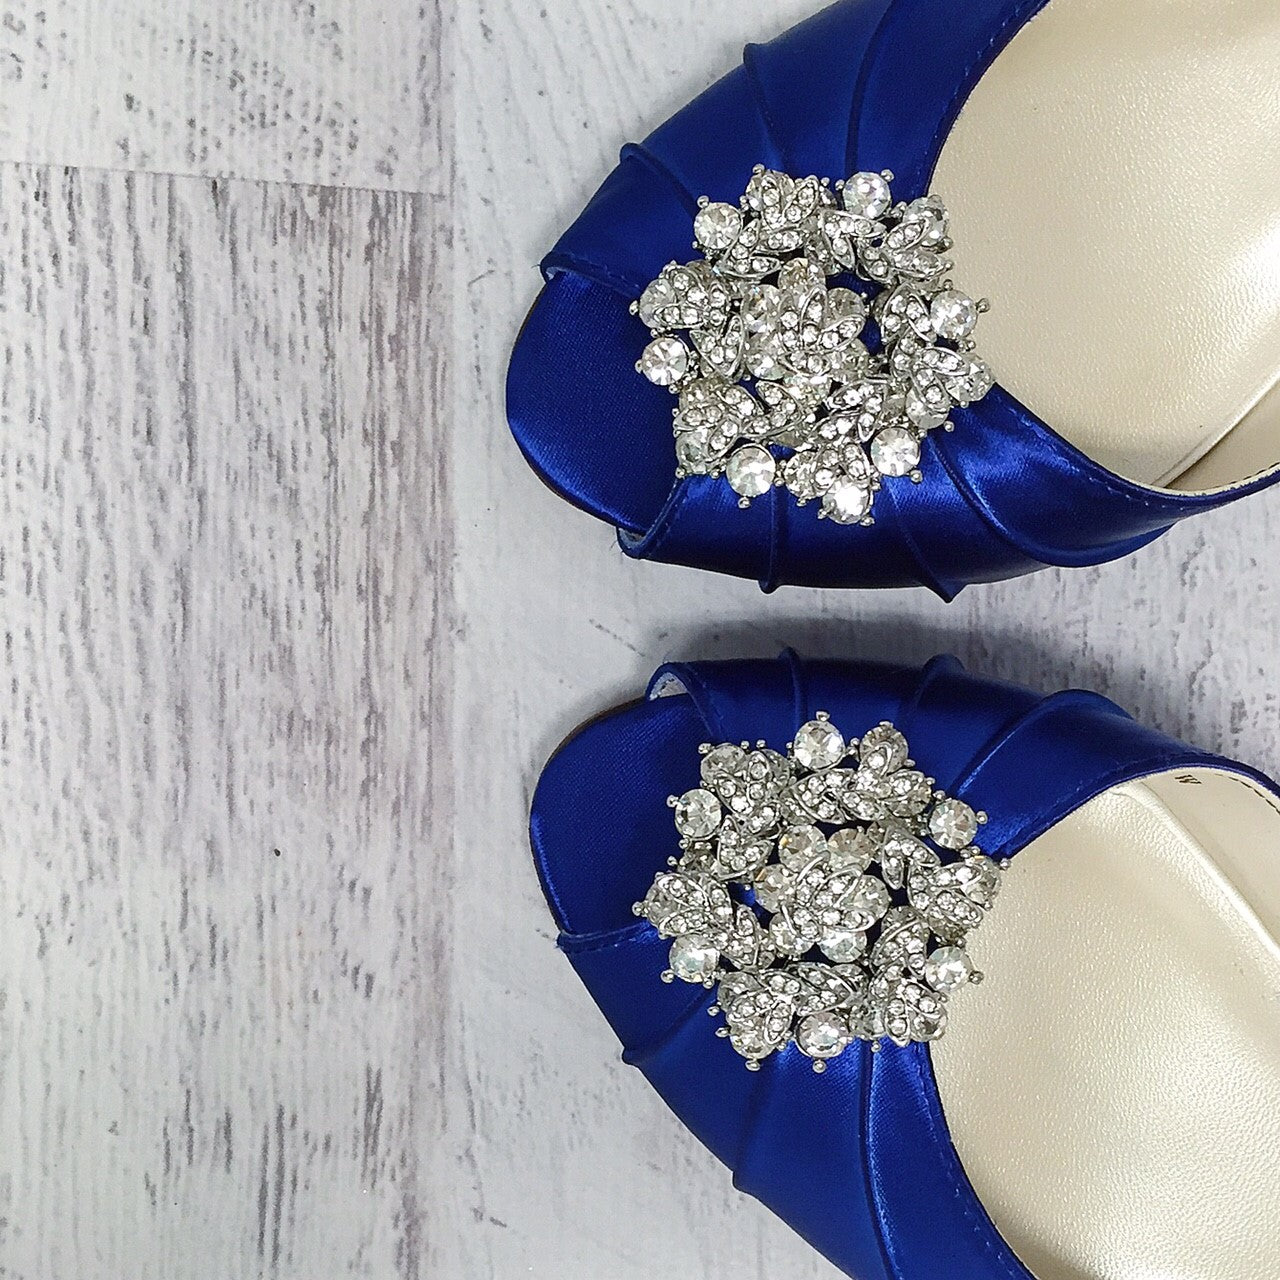 Low Heel Wedding Shoes Can Be Beautiful and Comfortable